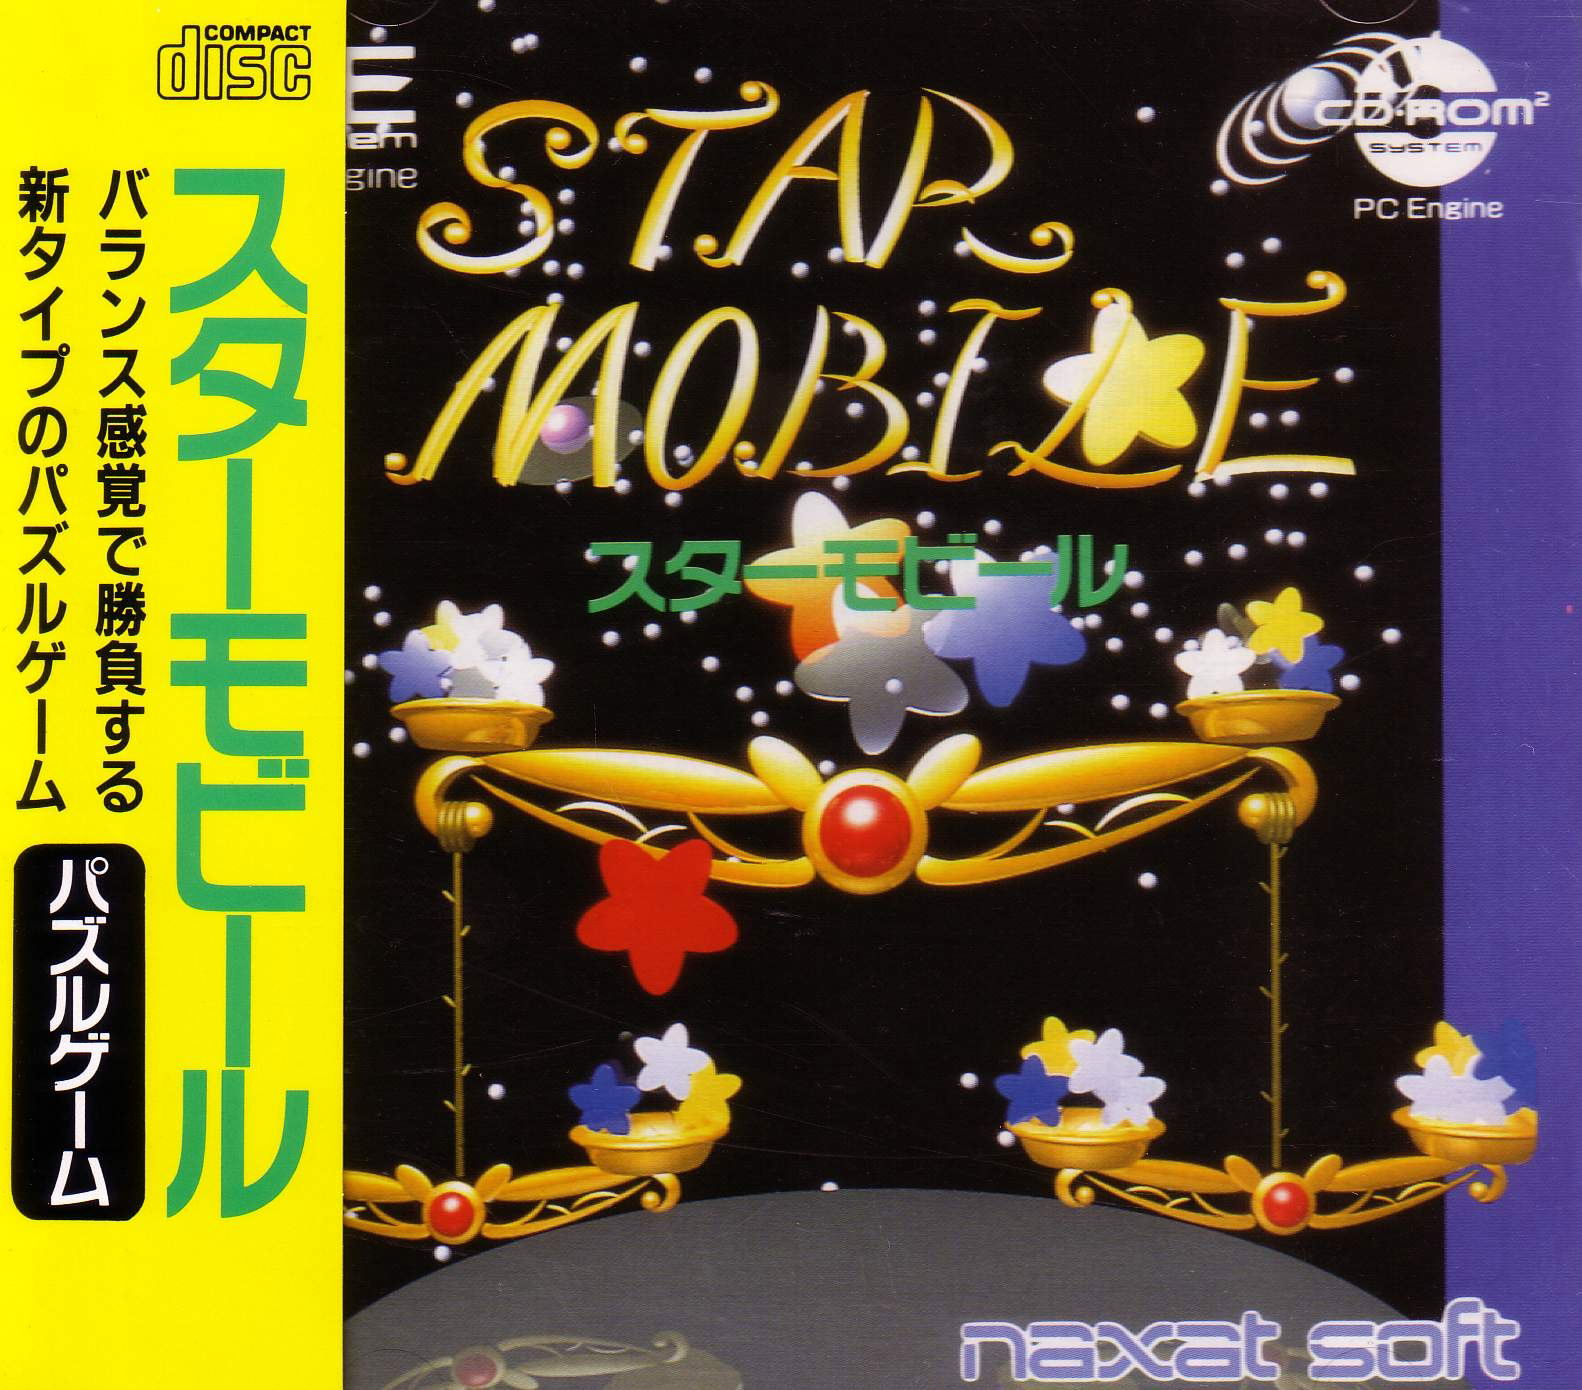 Star Mobile for PC-Engine CD-ROM²